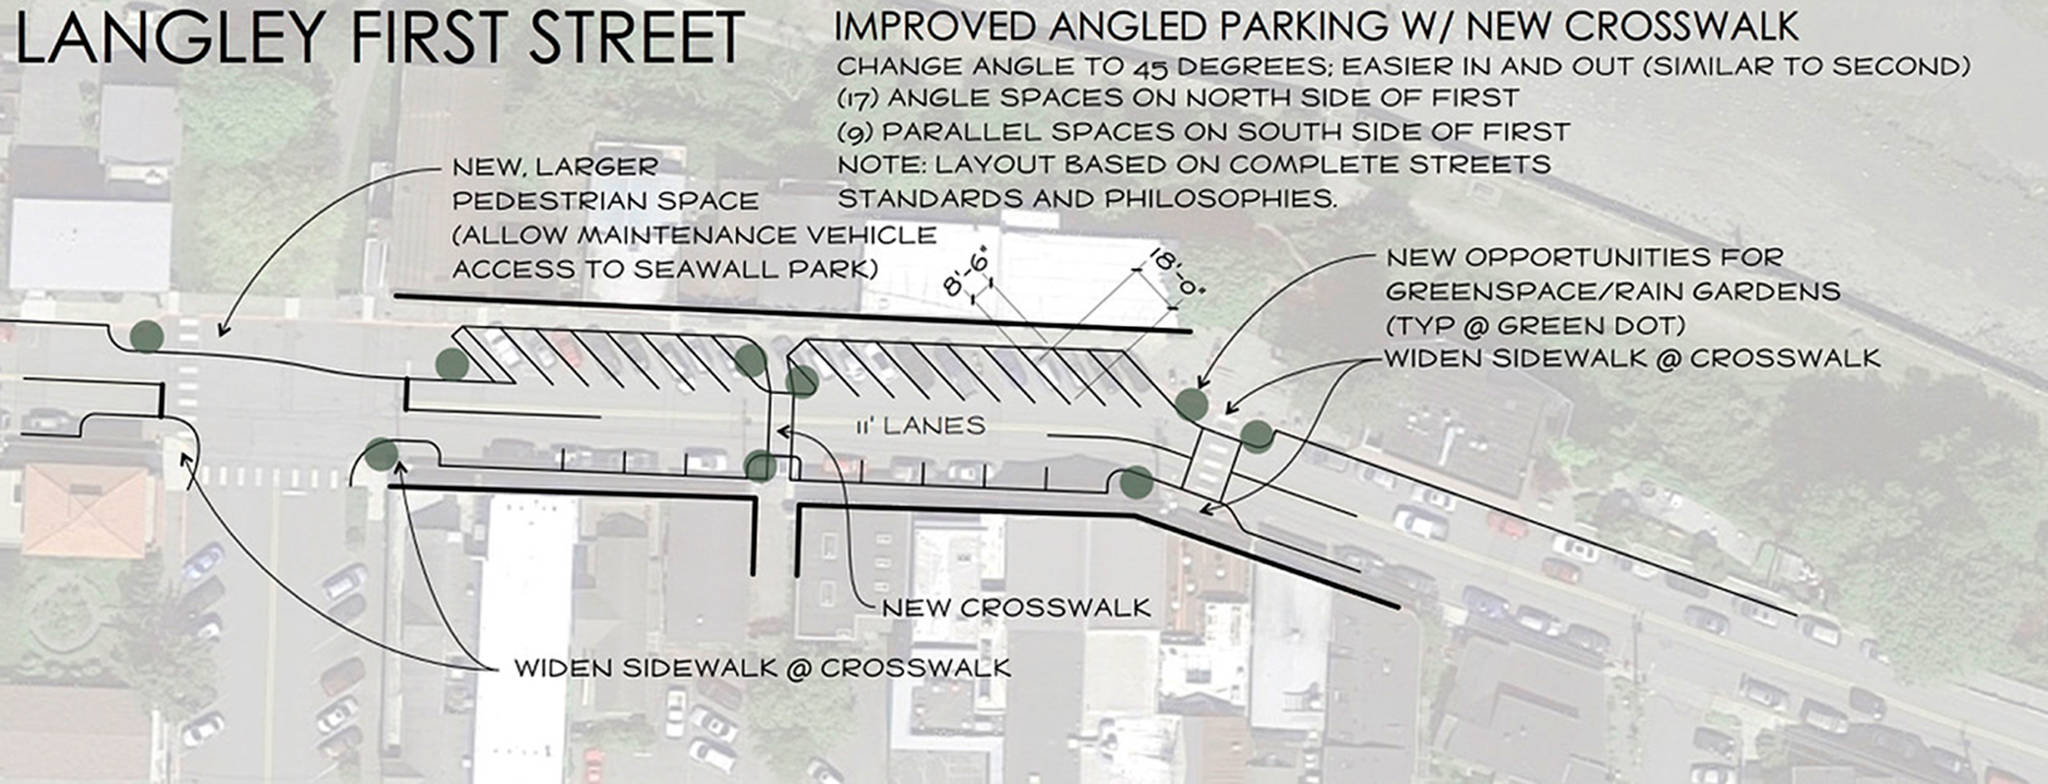 Parking proposal makes Langley business owners uneasy